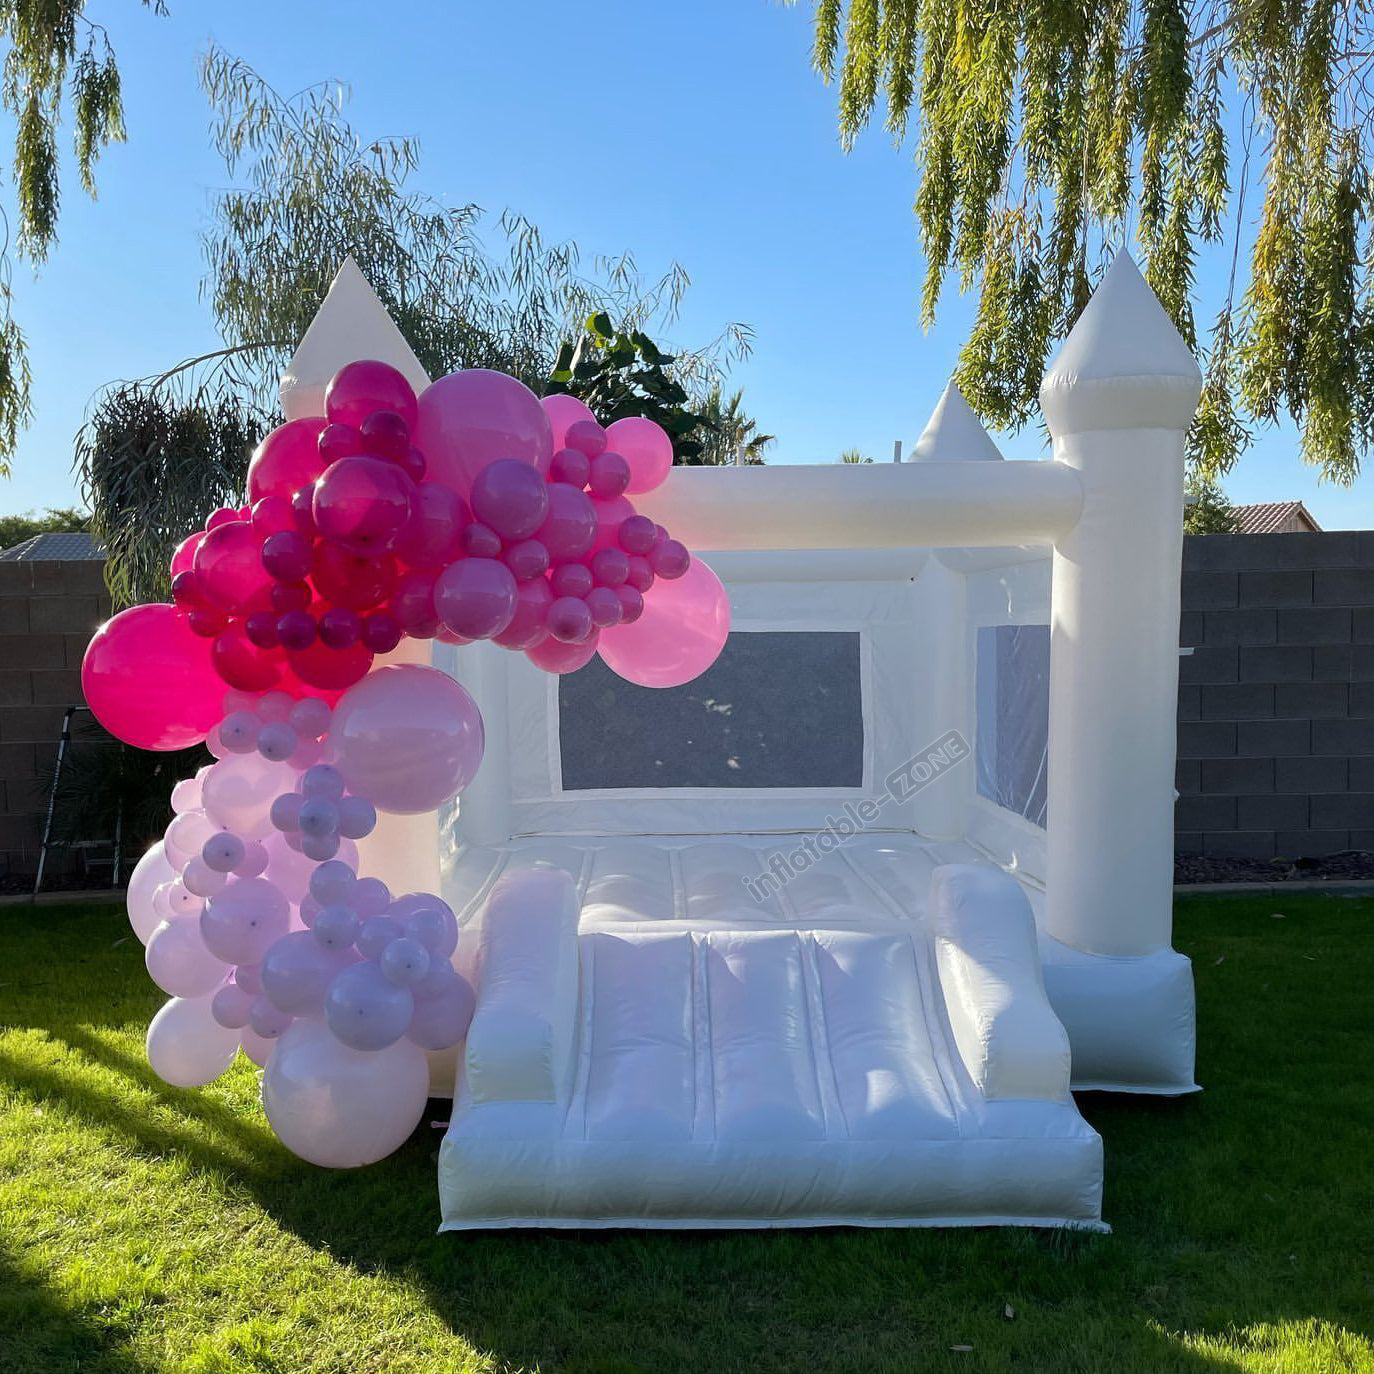 Popular White Bouncer Inflatable Wedding Bouncy Castle White Bounce House